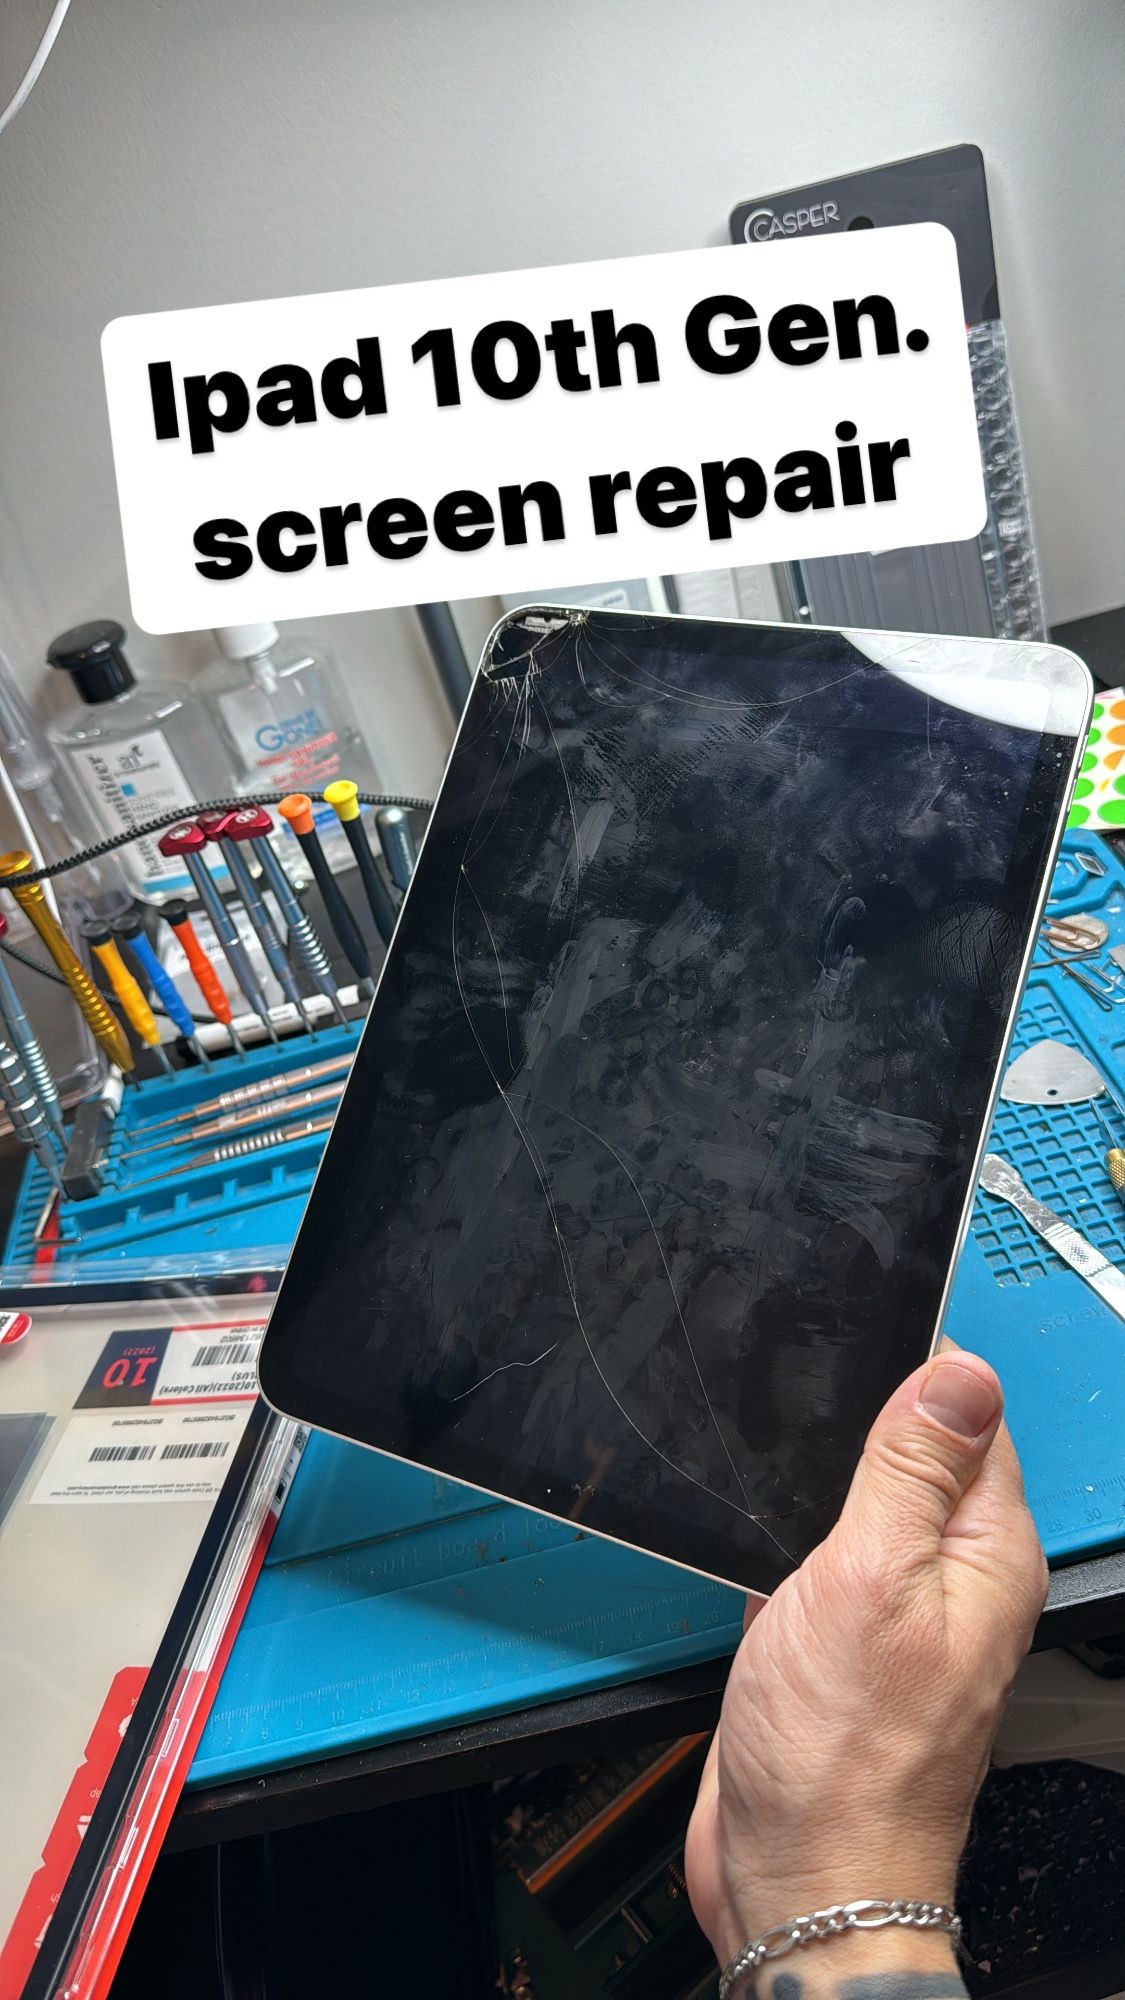 iPads Screens Replacements Starting At $49